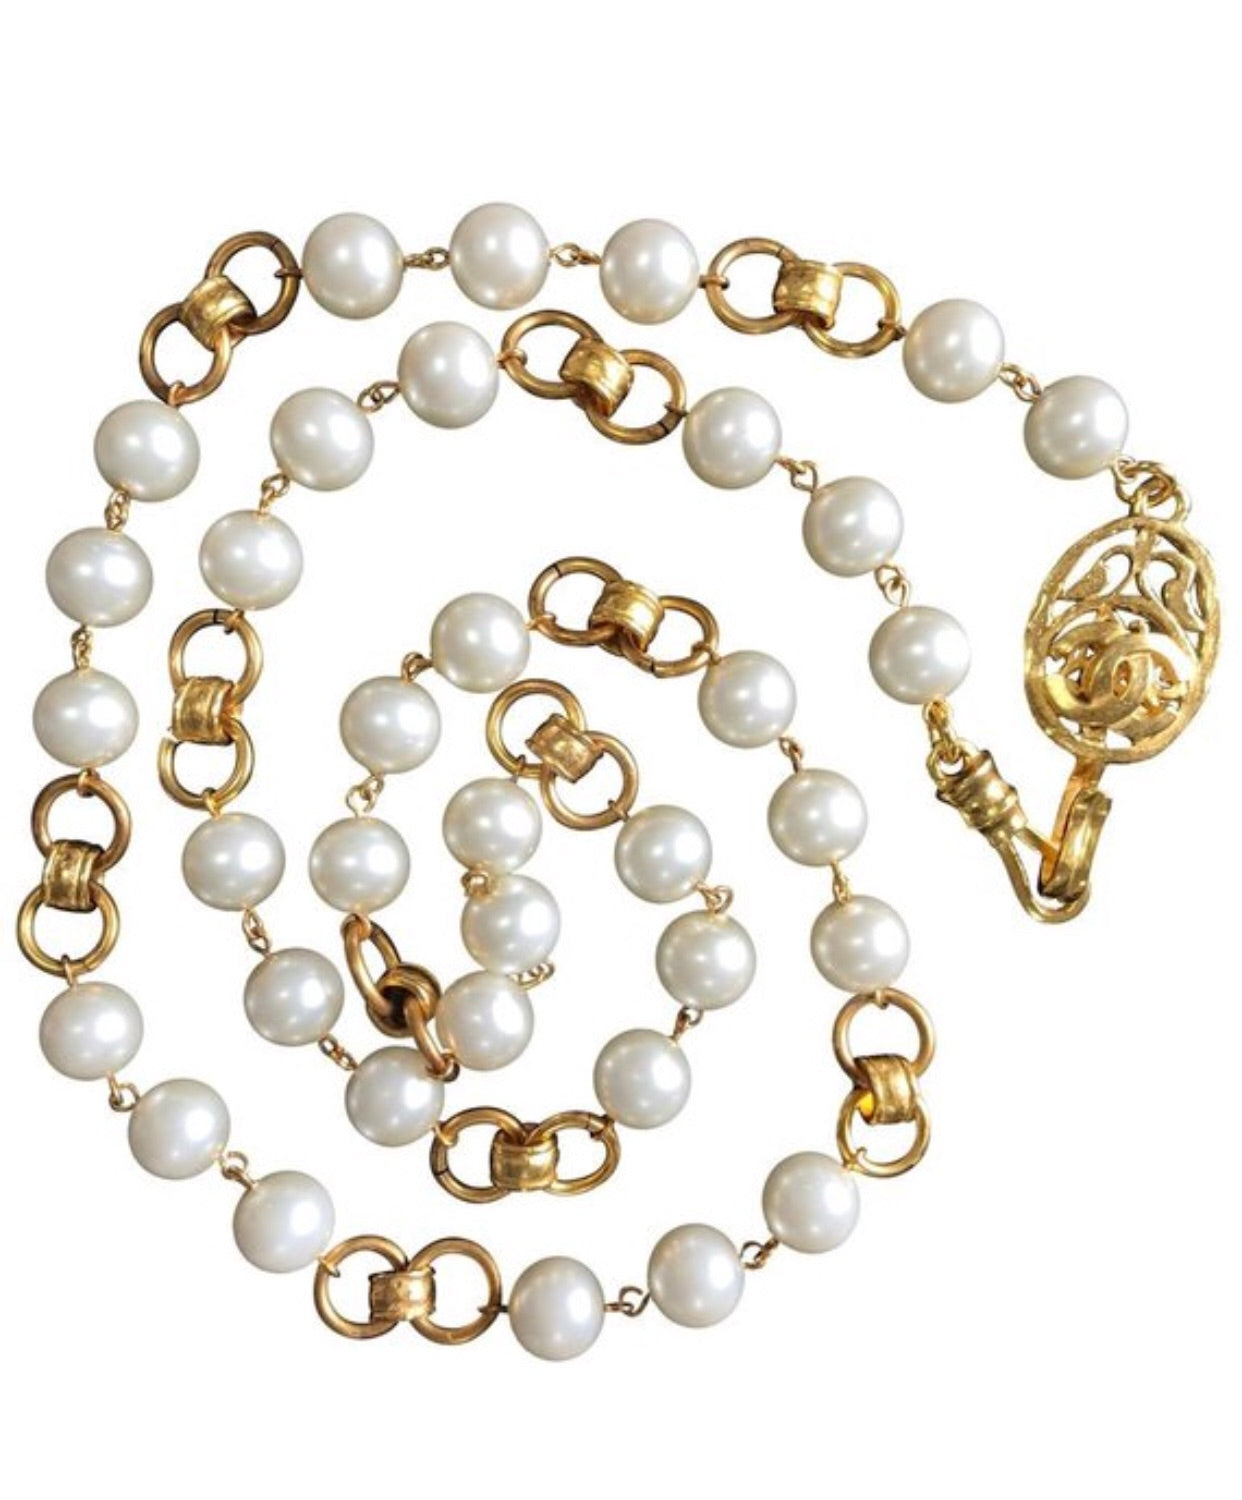 Vintage CHANEL golden chain and faux pearl long necklace with